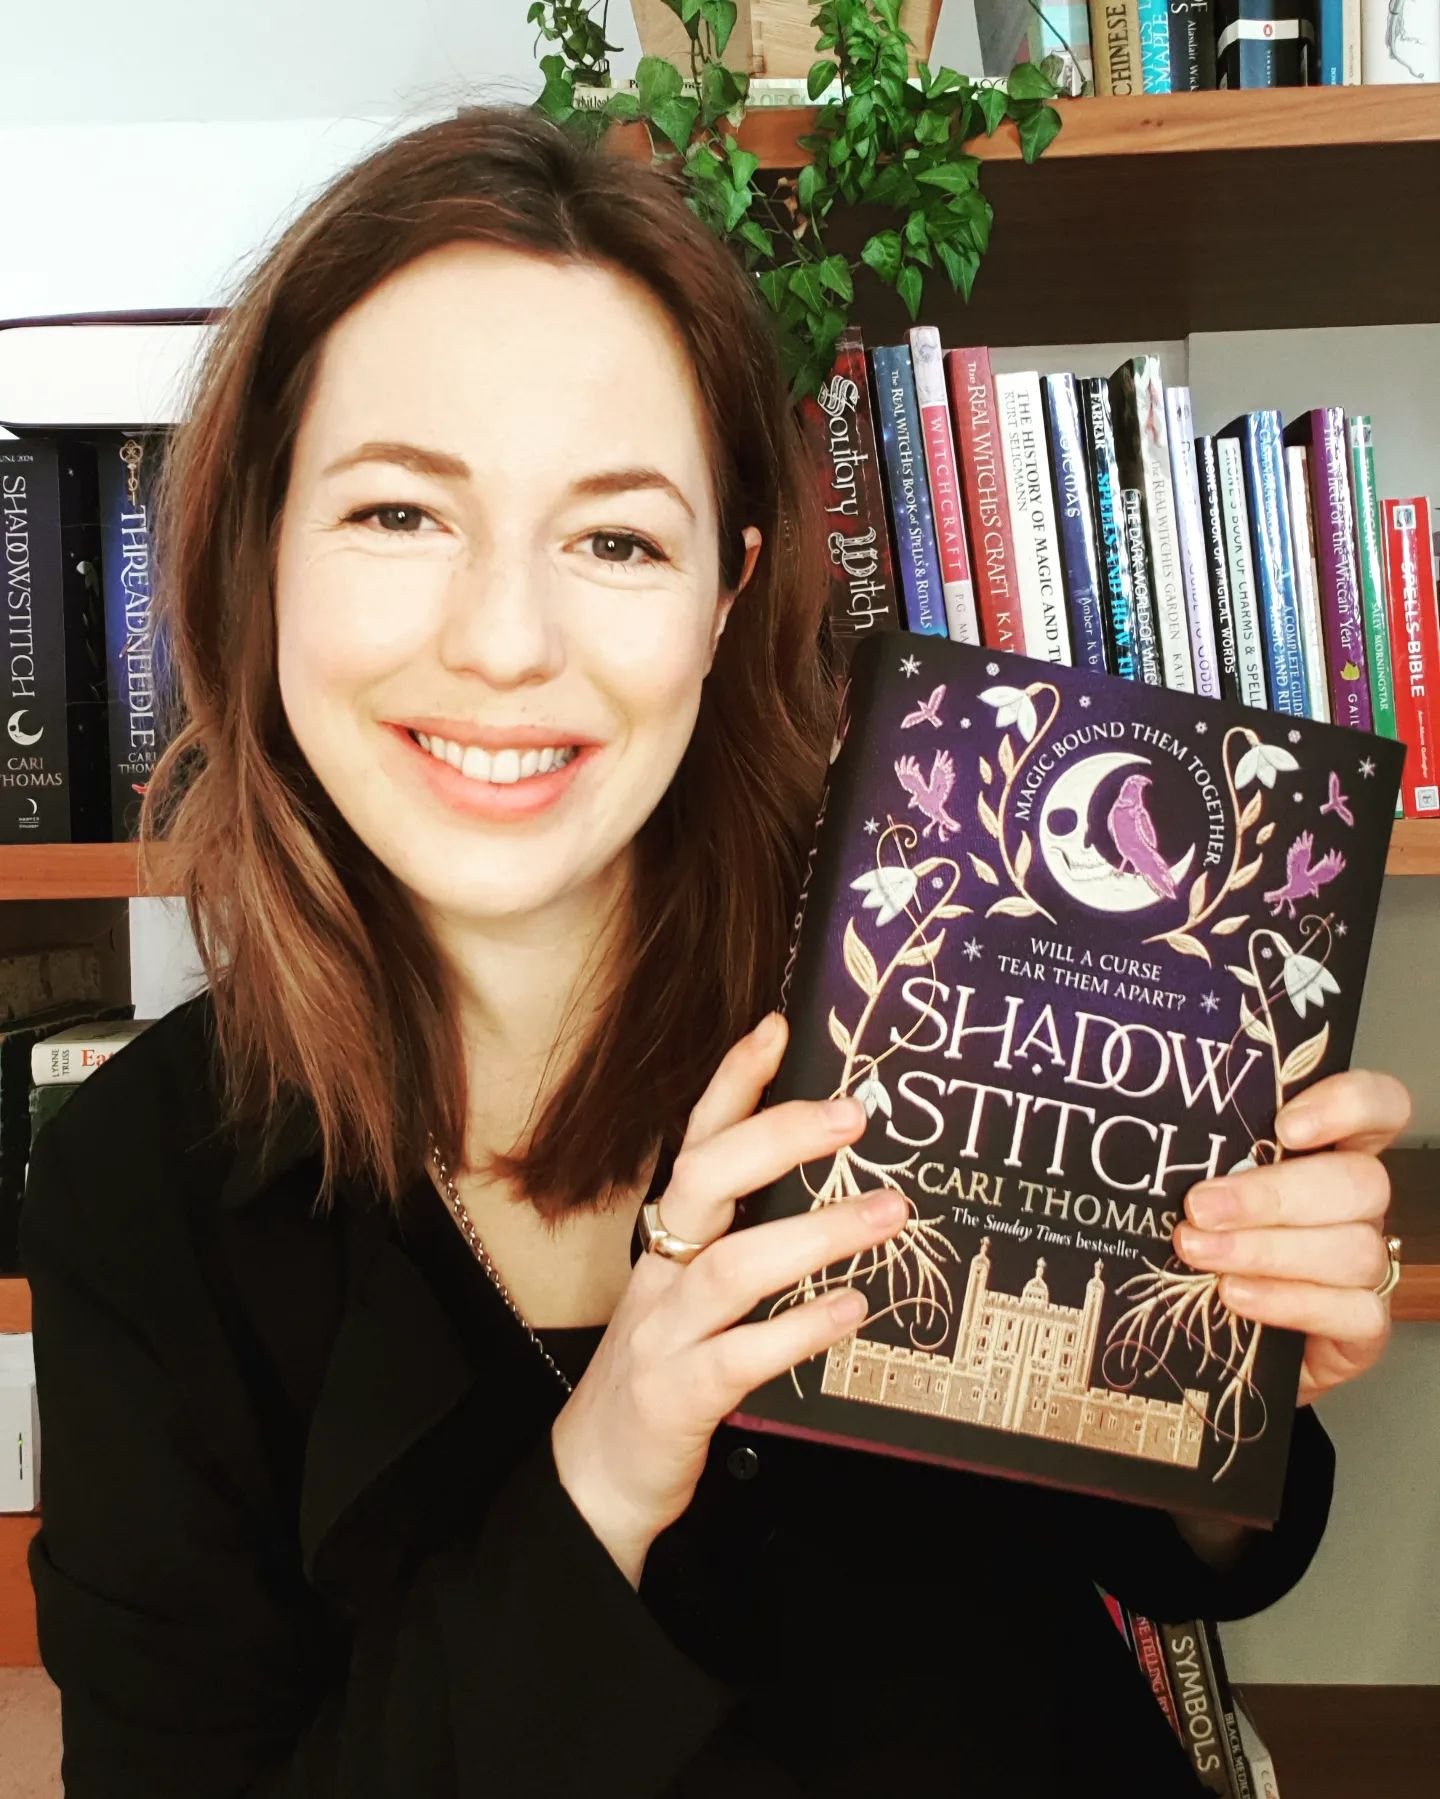 Just me holding my second book baby. So thrilled with the hardback and all its magical details 💜💜💜

Available to pre-order now via link in bio ✌

.
.
.
#Shadowstitch #bookcover #bookspecialedition #Threadneedle #fantasyseries #fantasyfiction #spra